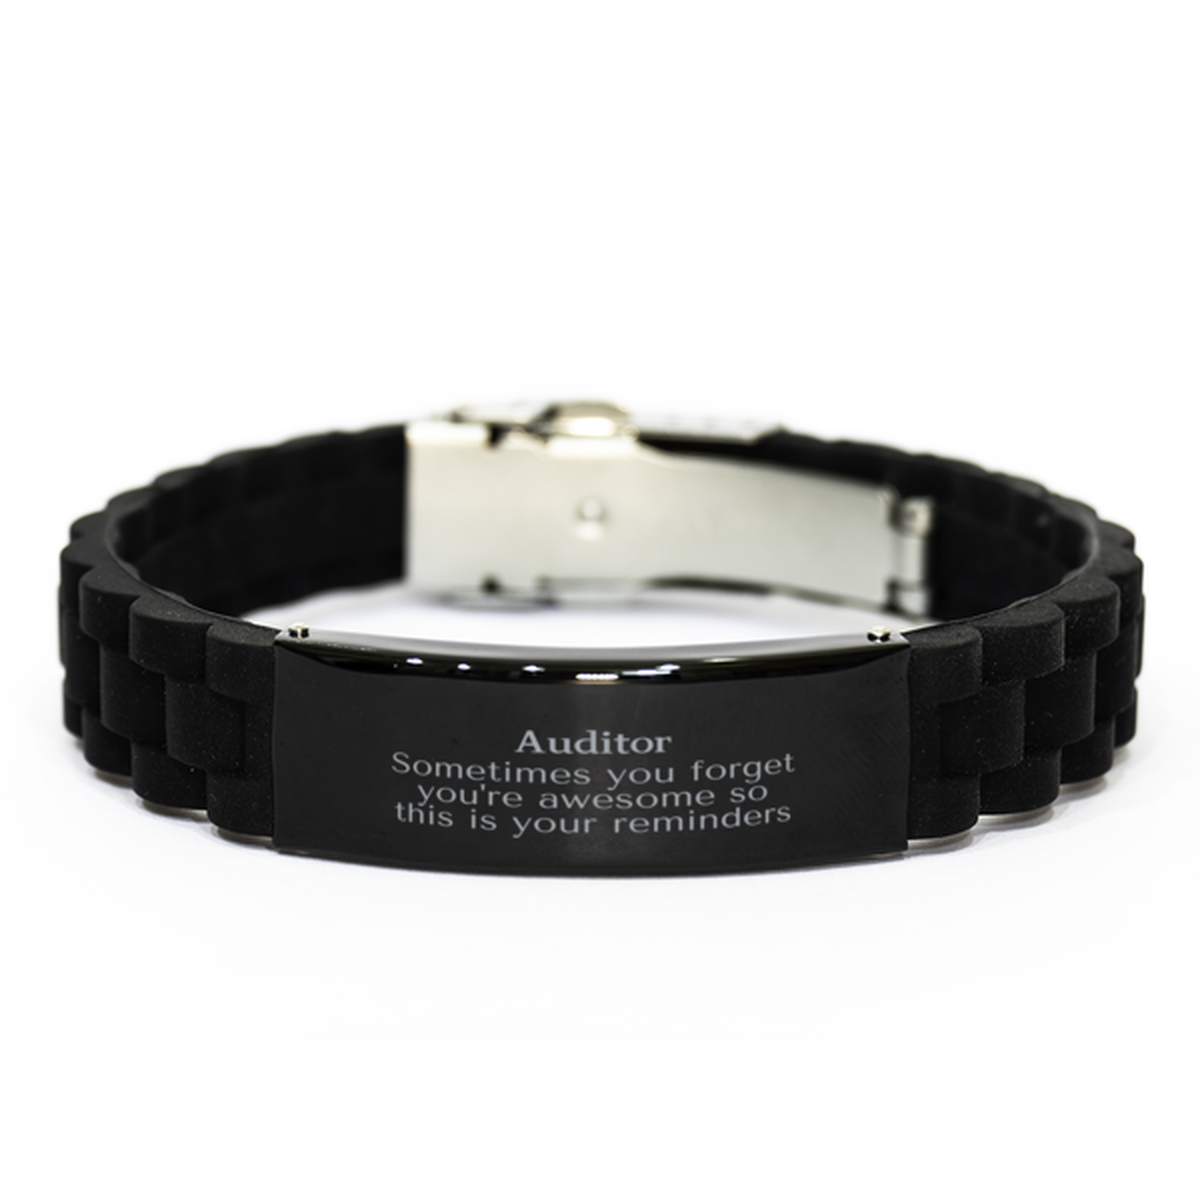 Sentimental Auditor Black Glidelock Clasp Bracelet, Auditor Sometimes you forget you're awesome so this is your reminders, Graduation Christmas Birthday Gifts for Auditor, Men, Women, Coworkers